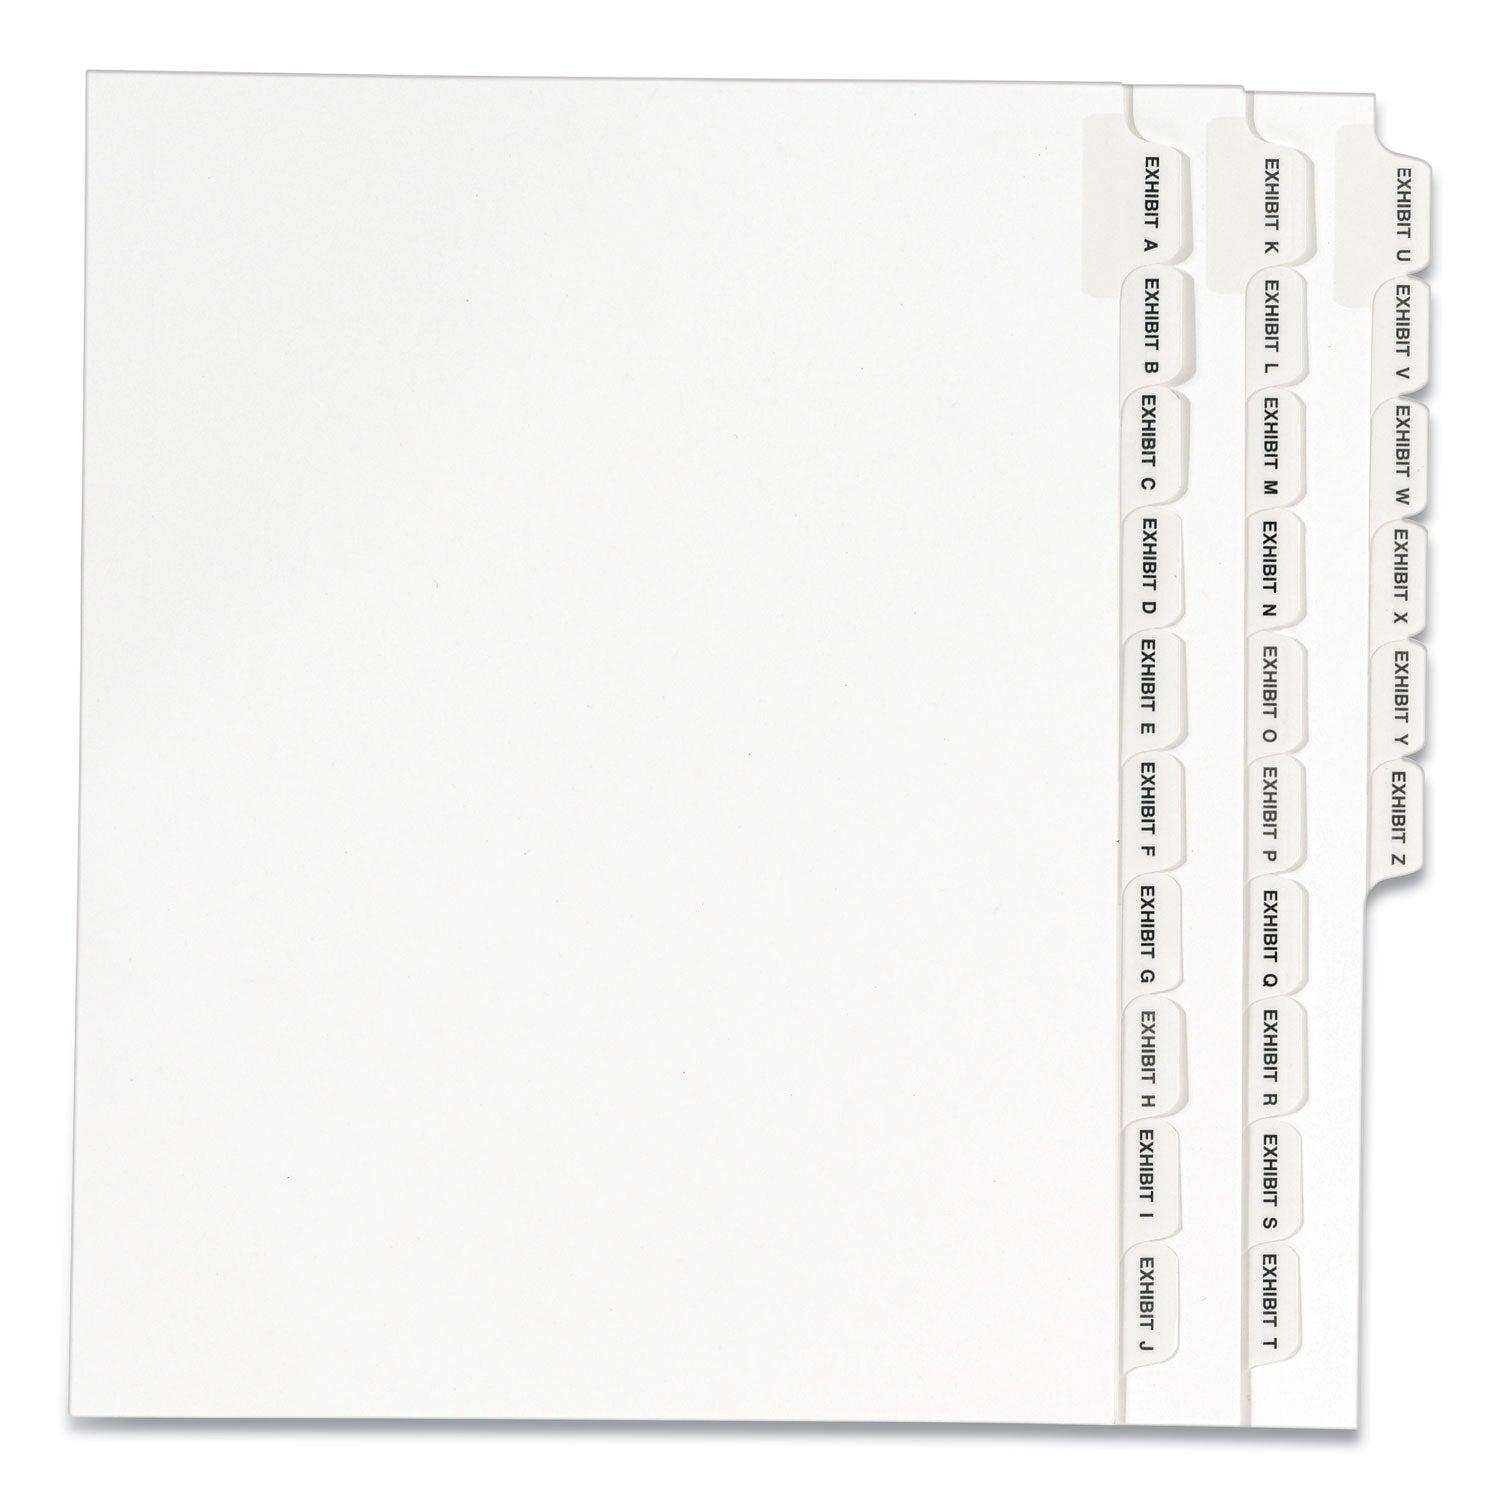 Preprinted Legal Exhibit Side Tab Index Dividers, Avery Style, 26-Tab, Exhibit A to Exhibit Z, 11 x 8.5, White, 1 Set, (1370) - 